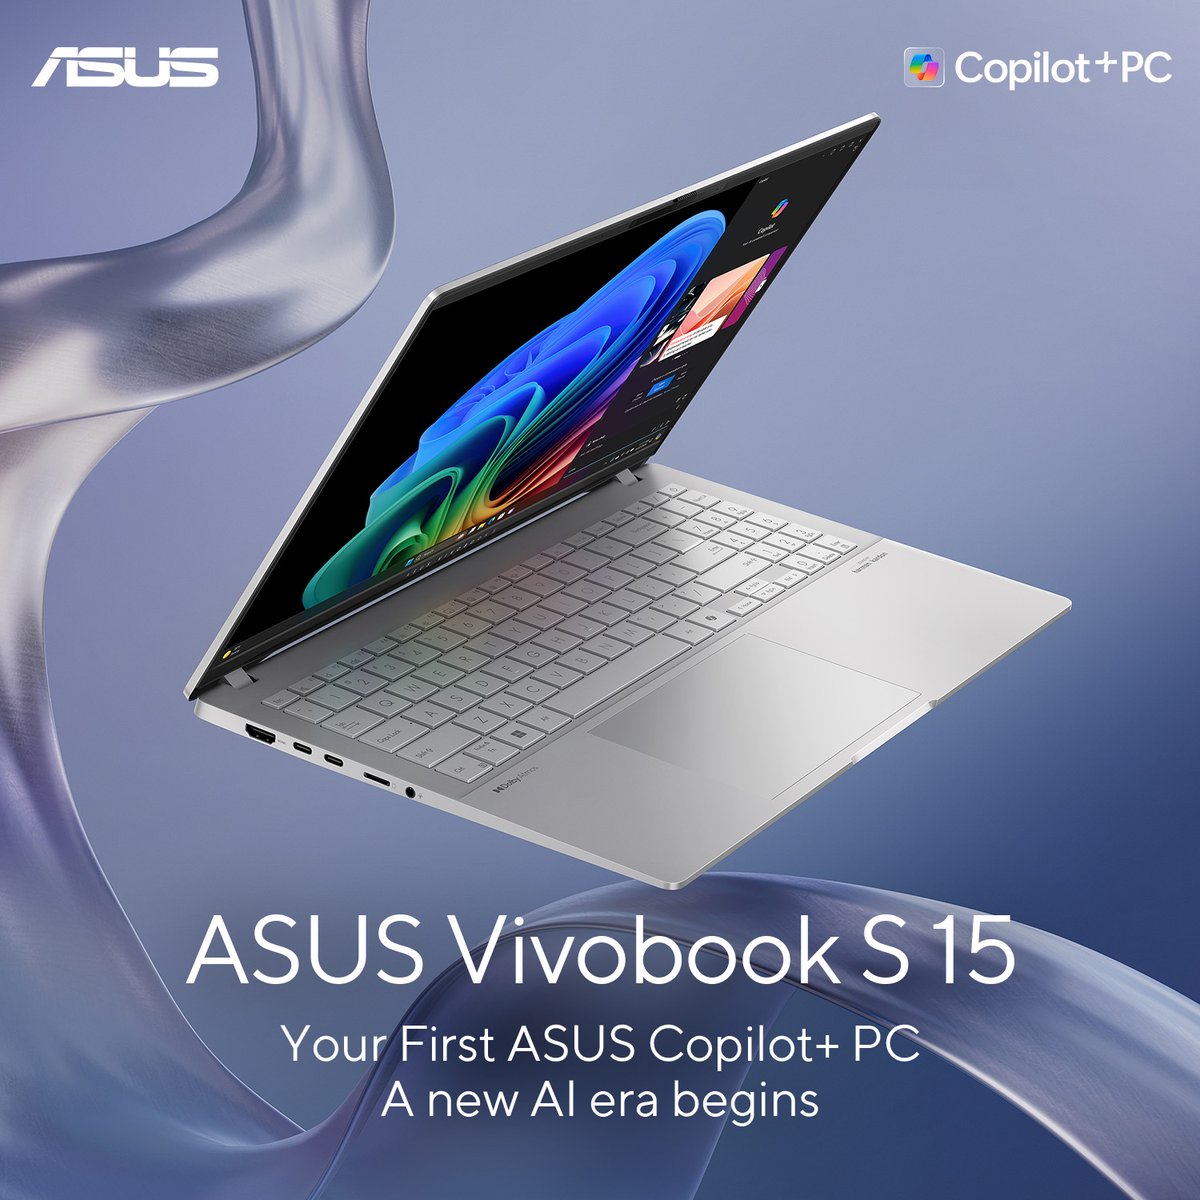 Introducing the @ASUS #Vivobook S 15, powered by #Snapdragon X Elite to deliver the world’s fastest NPU for laptops with 45 TOPS. 😍💪 With incredible #AI power, connectivity, & multi-day battery life, it'll change the way you work, study, create, & play. bit.ly/3KdbX20